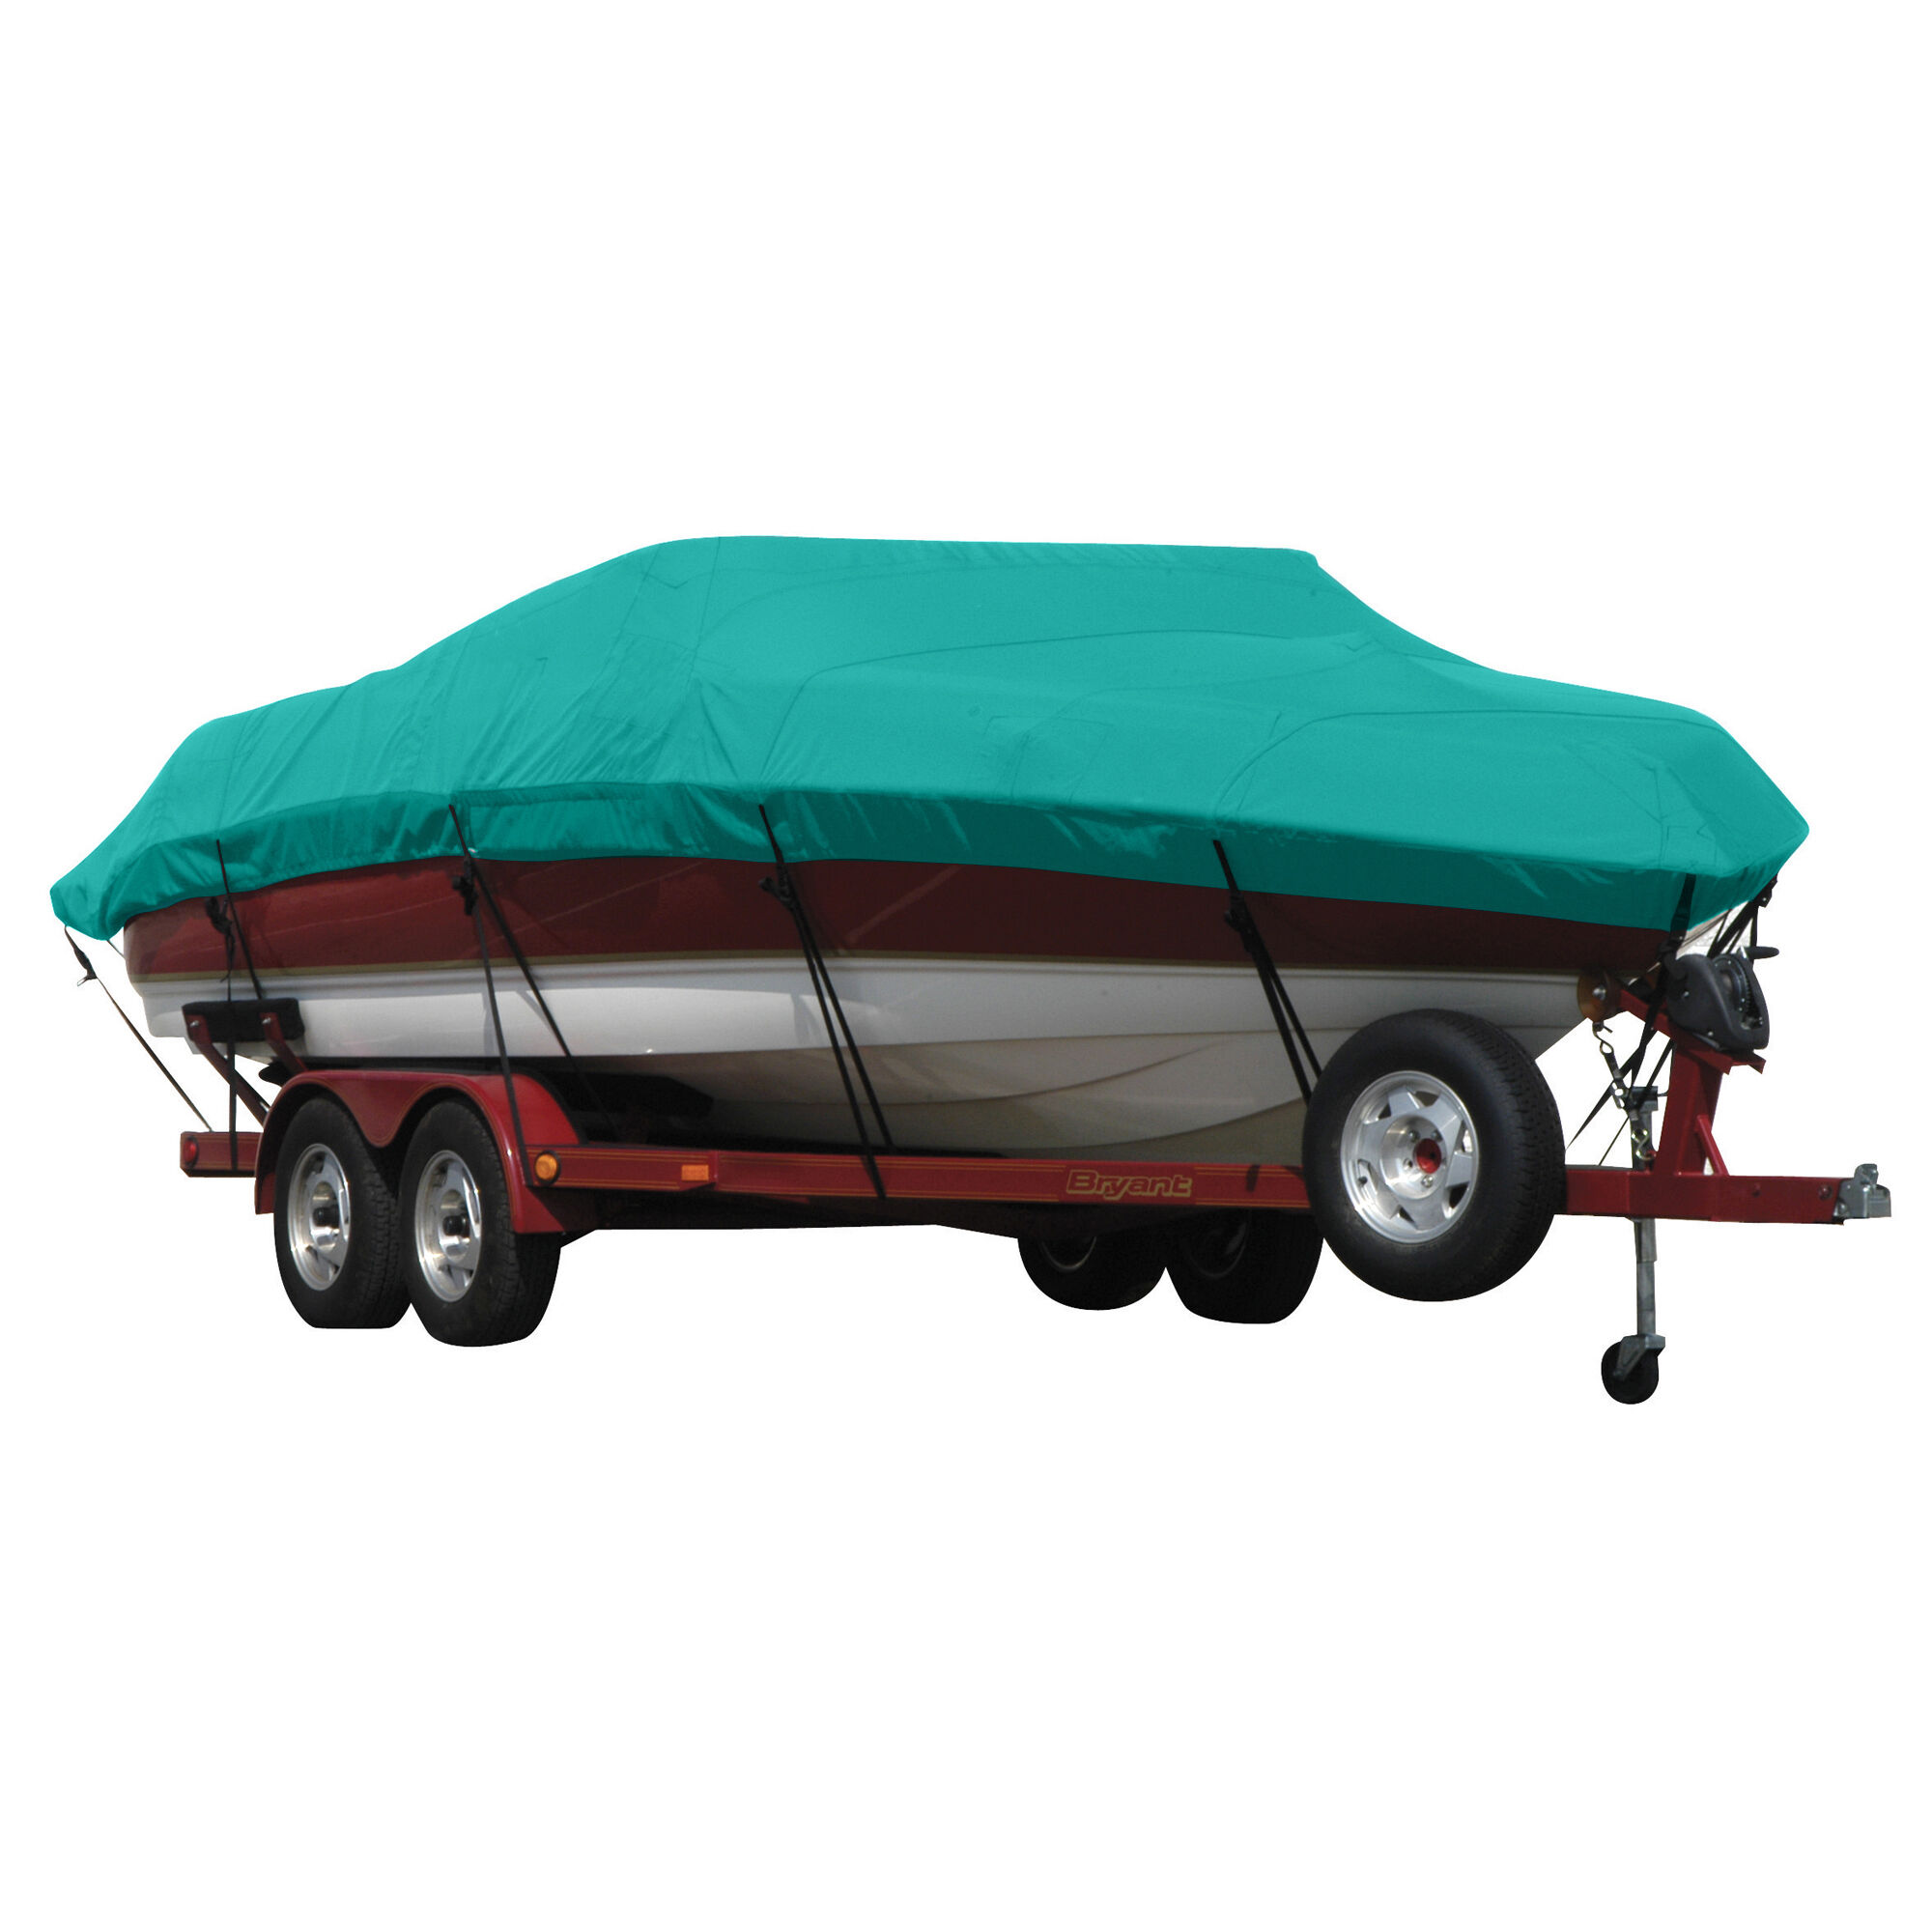 Covermate Exact Fit Sunbrella Boat Cover for Campion Chase 580 Zri/Zricd Chase 580 Zri/Zricd I/O. Persian Green